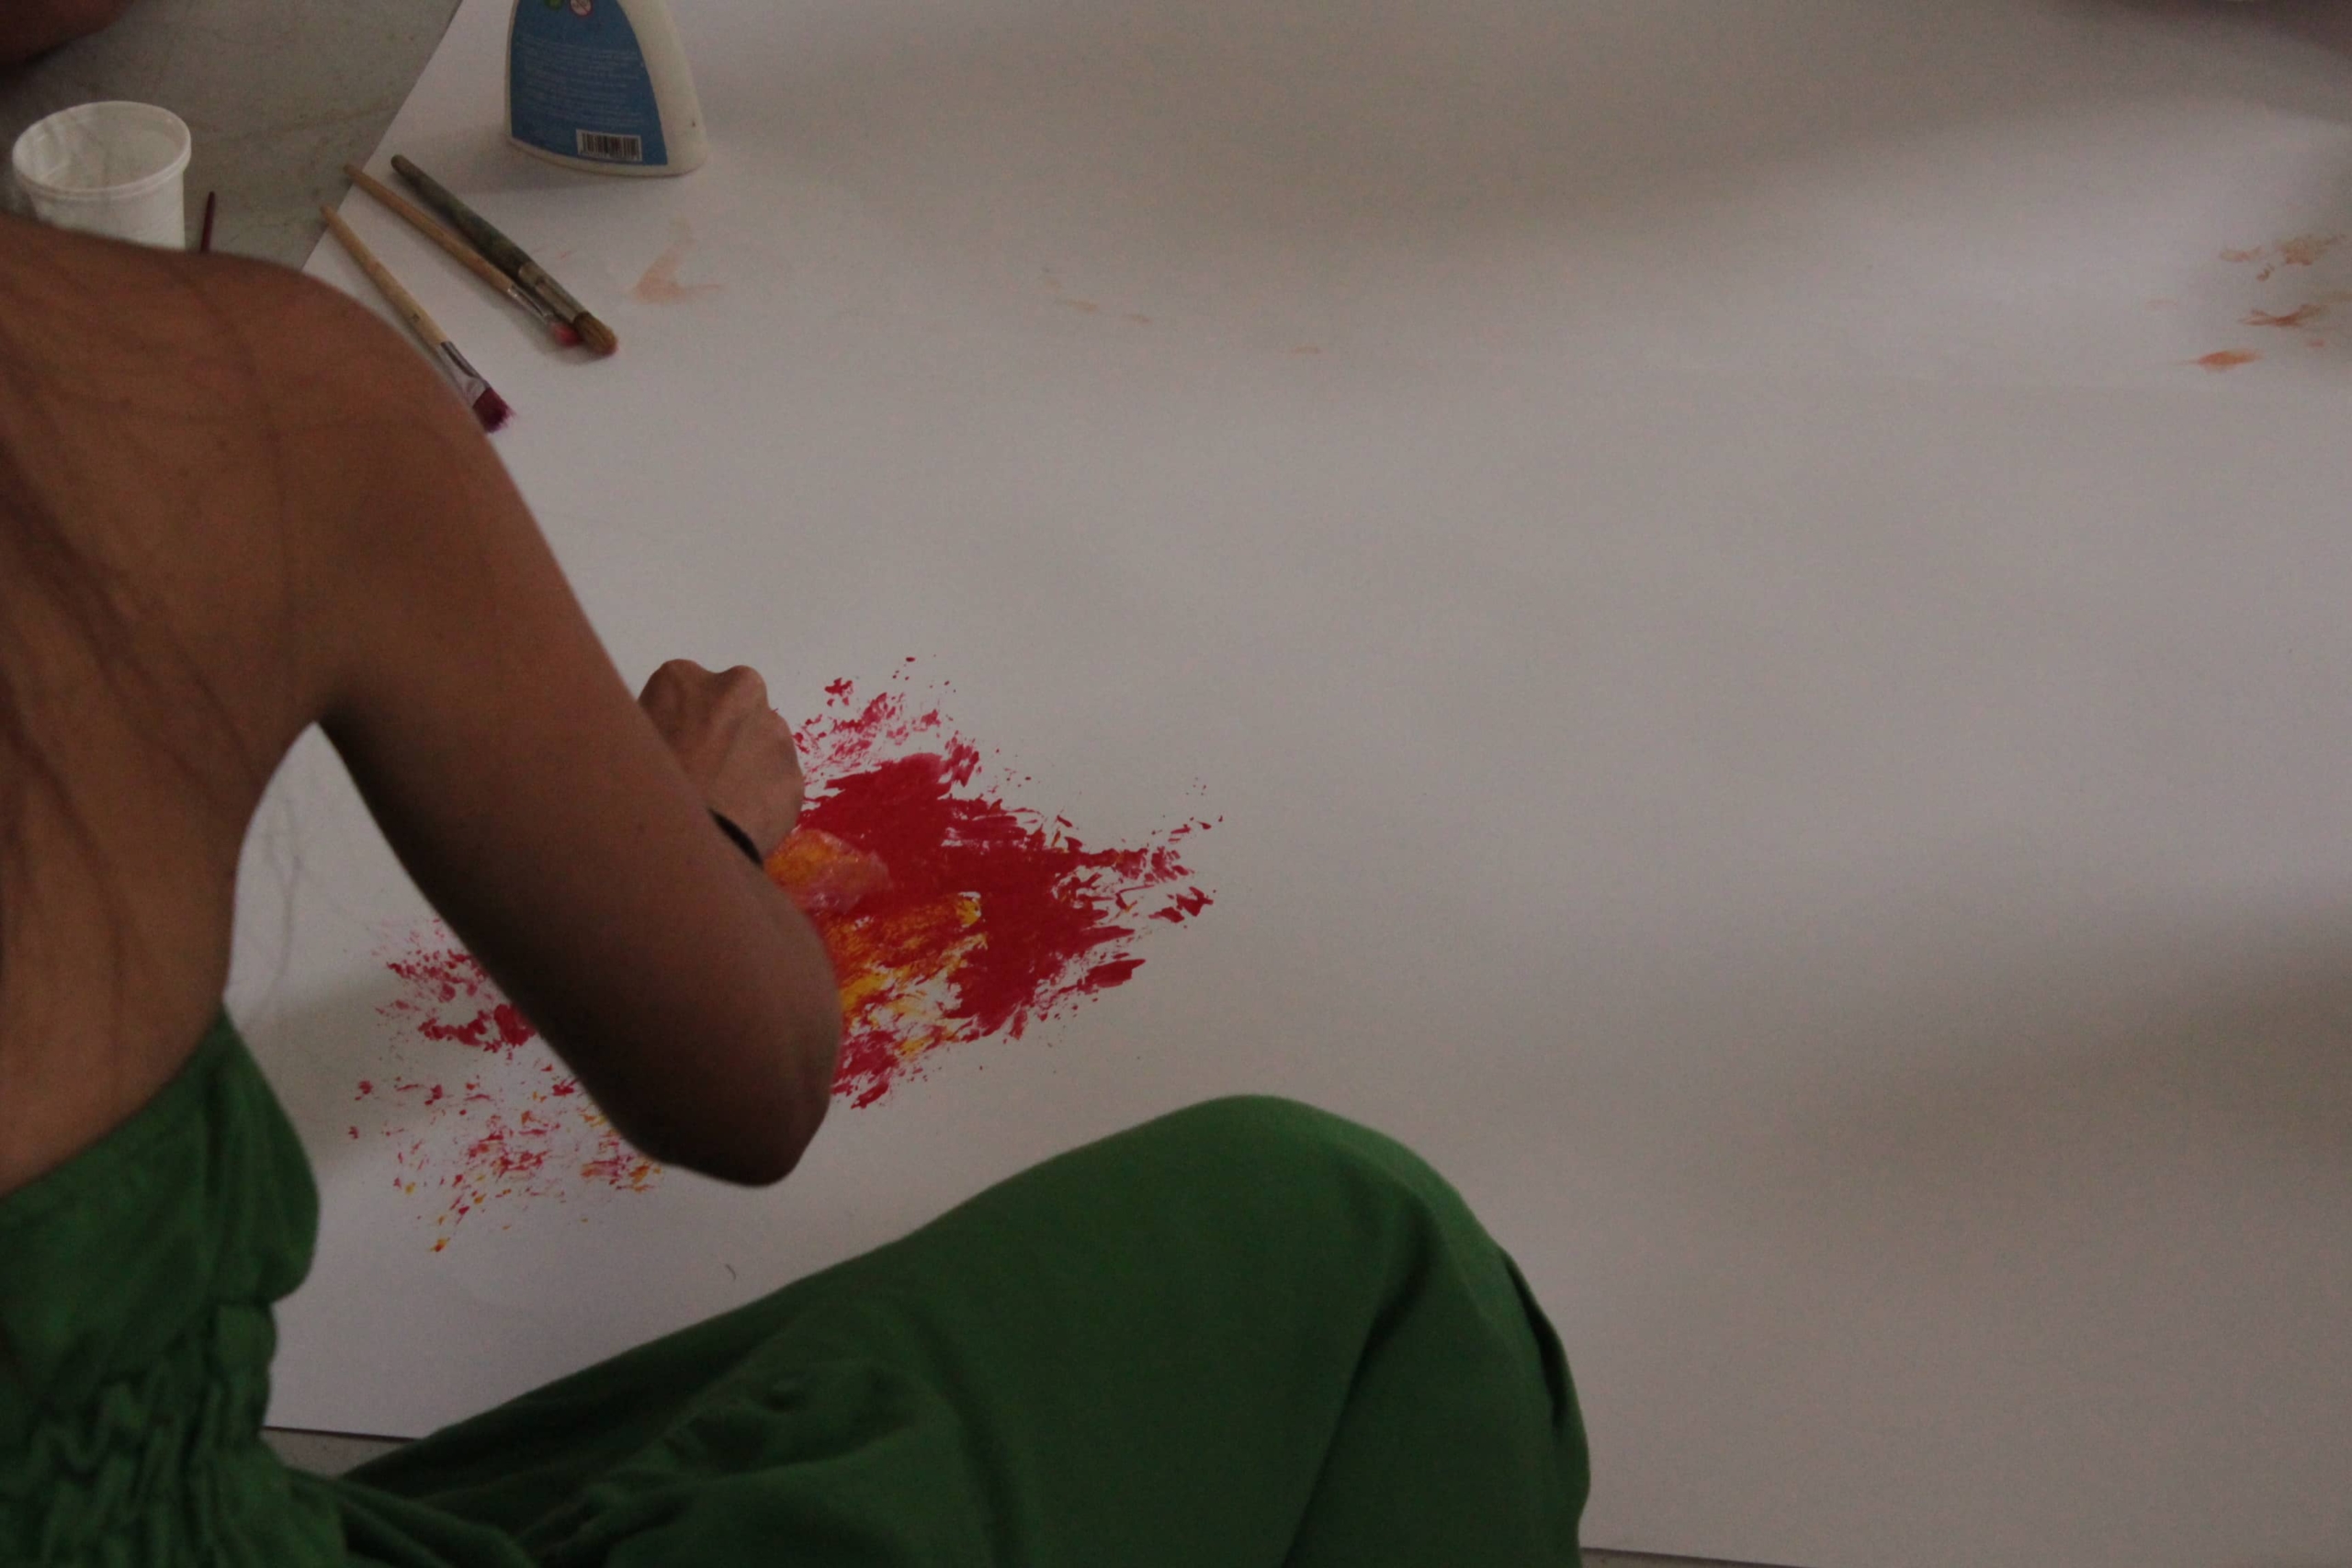 Applications of art therapy in special education